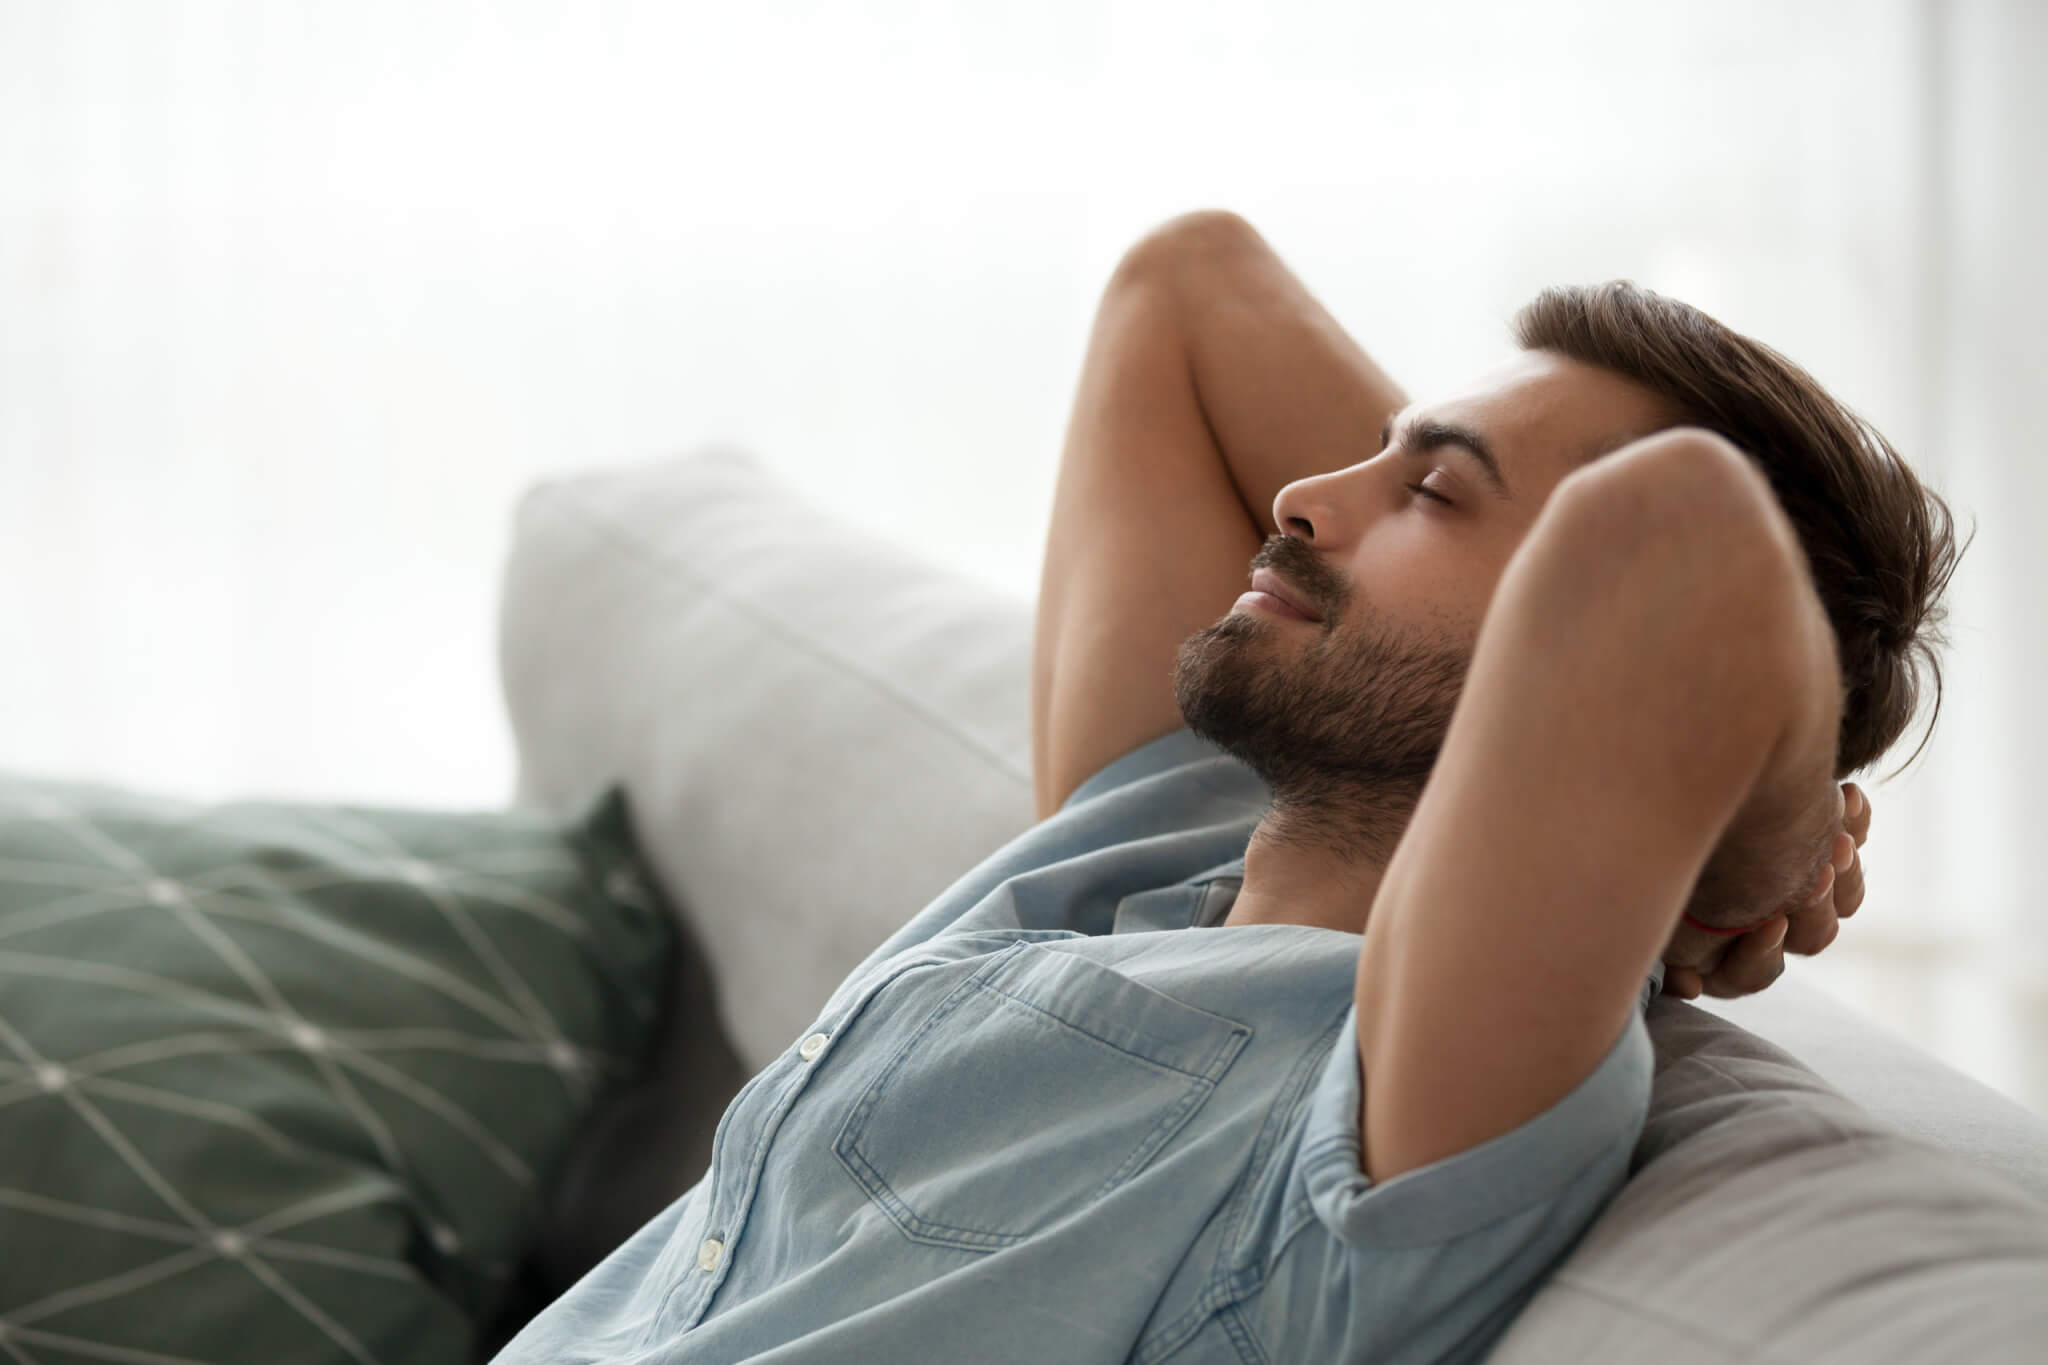 Man relaxing on couch alone, resting, happy